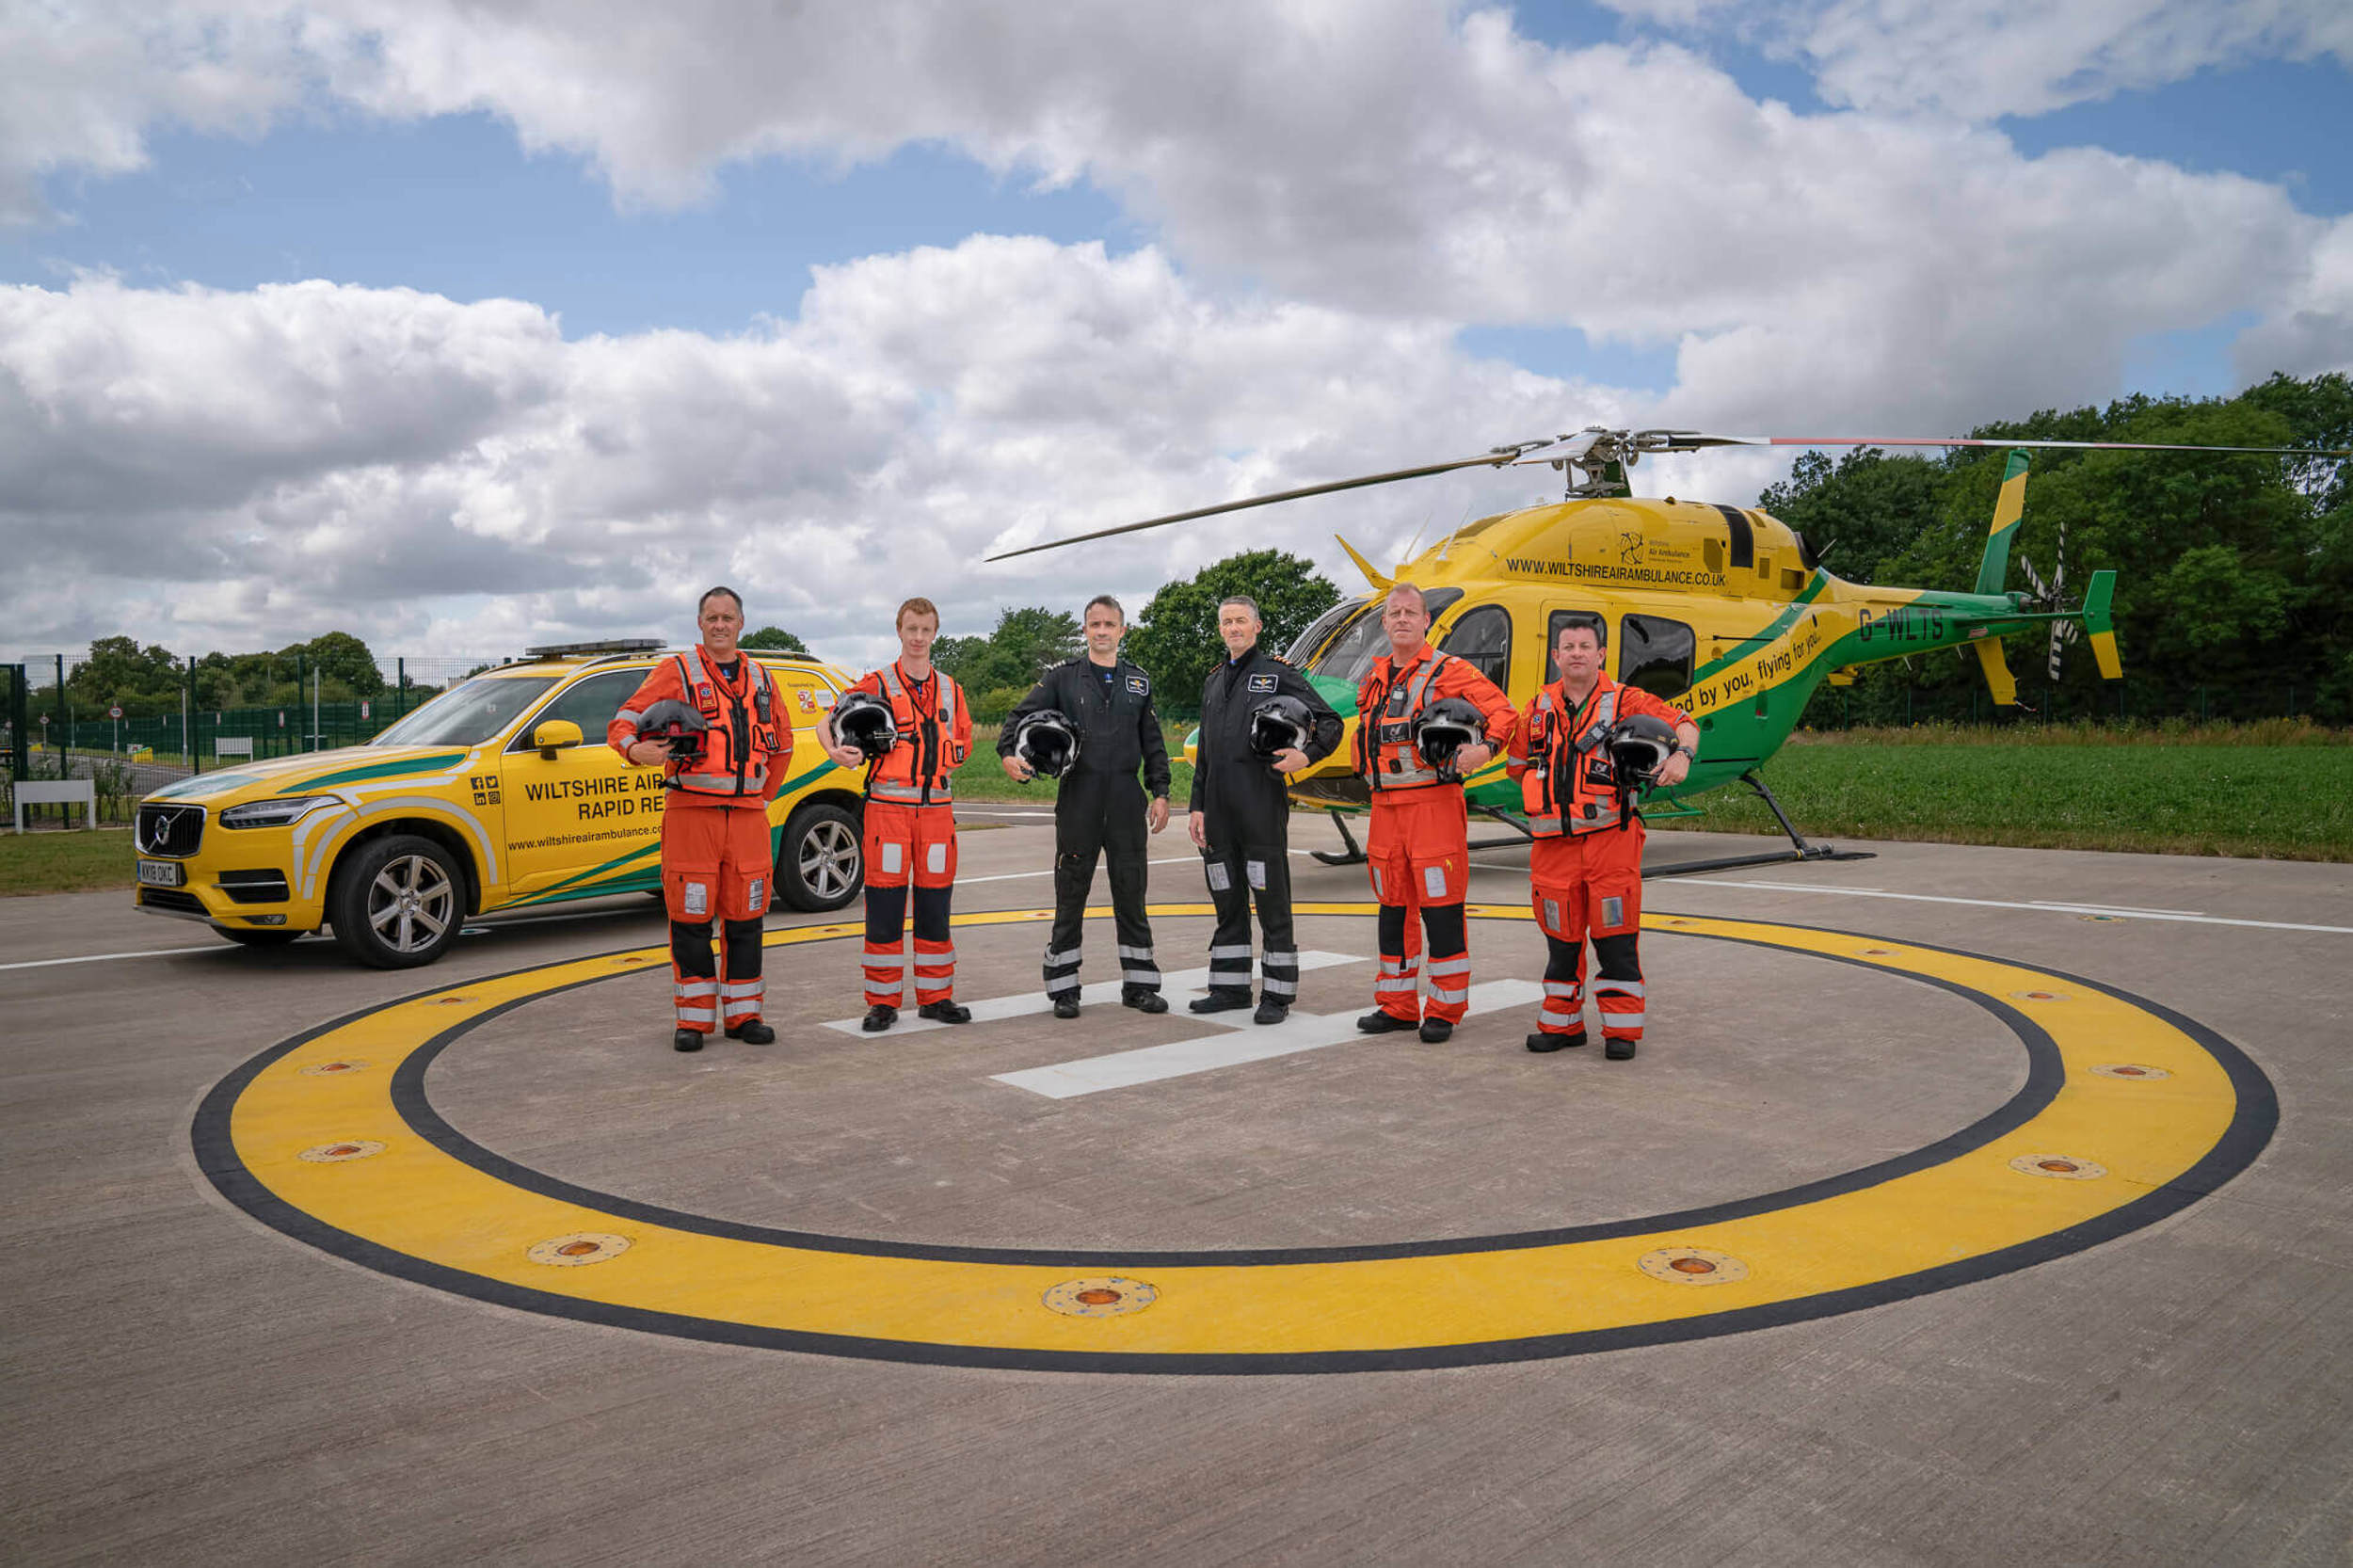 A group photo of four paramedics and two pilots stood on the helipad in front of the helicopter and critical care cars.